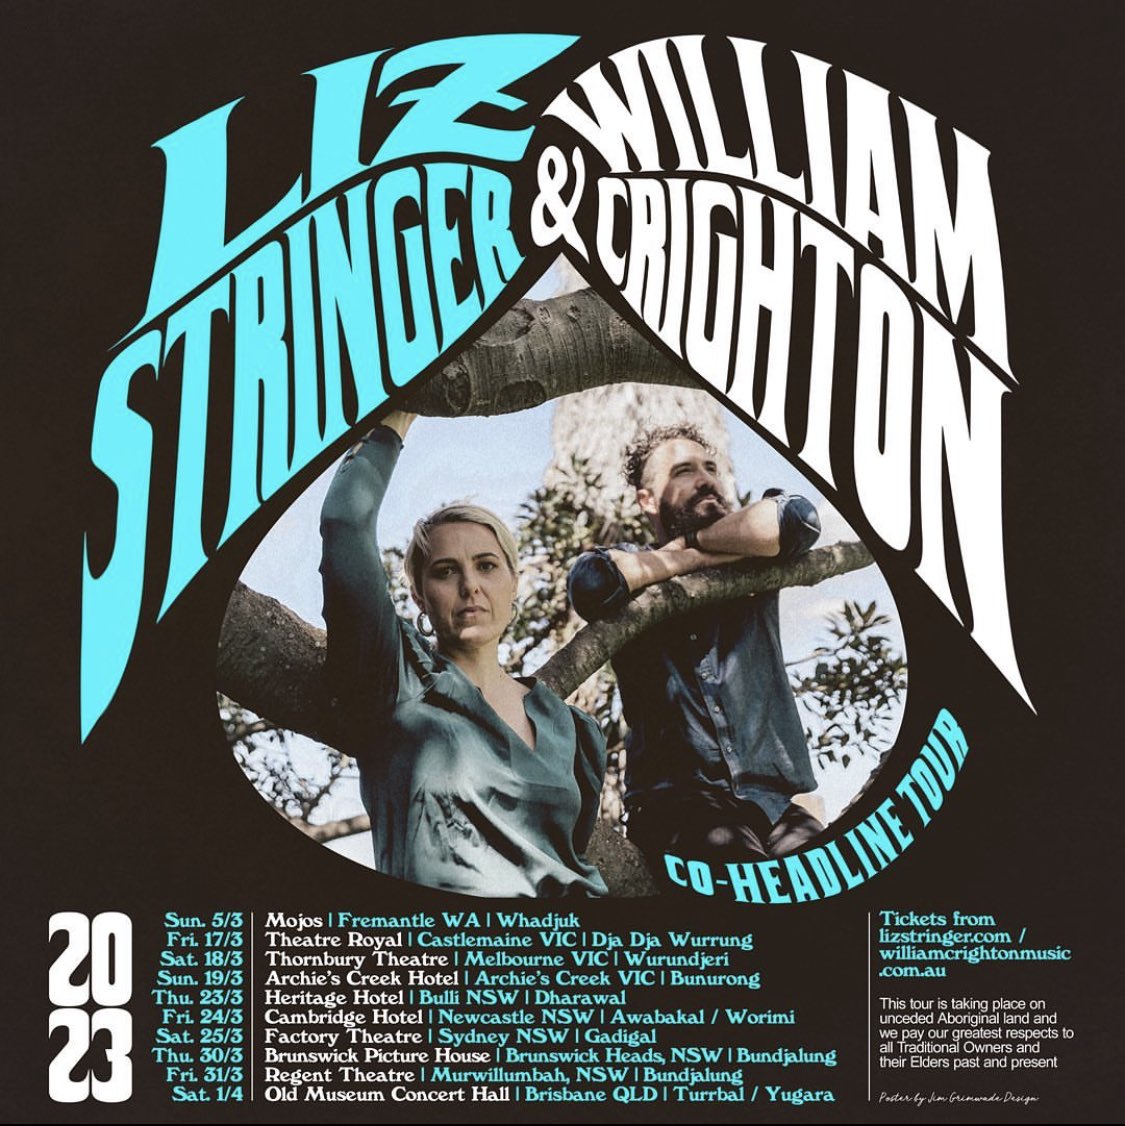 📢 @LizStringerAU is going on a double headline tour with @william_crighton in March 2023 around Australia.They will be playing in WA, VIC, NSW and QLD, performing some songs together and a headline set each of their own material. Tickets are on sale now lizstringer.com/shows